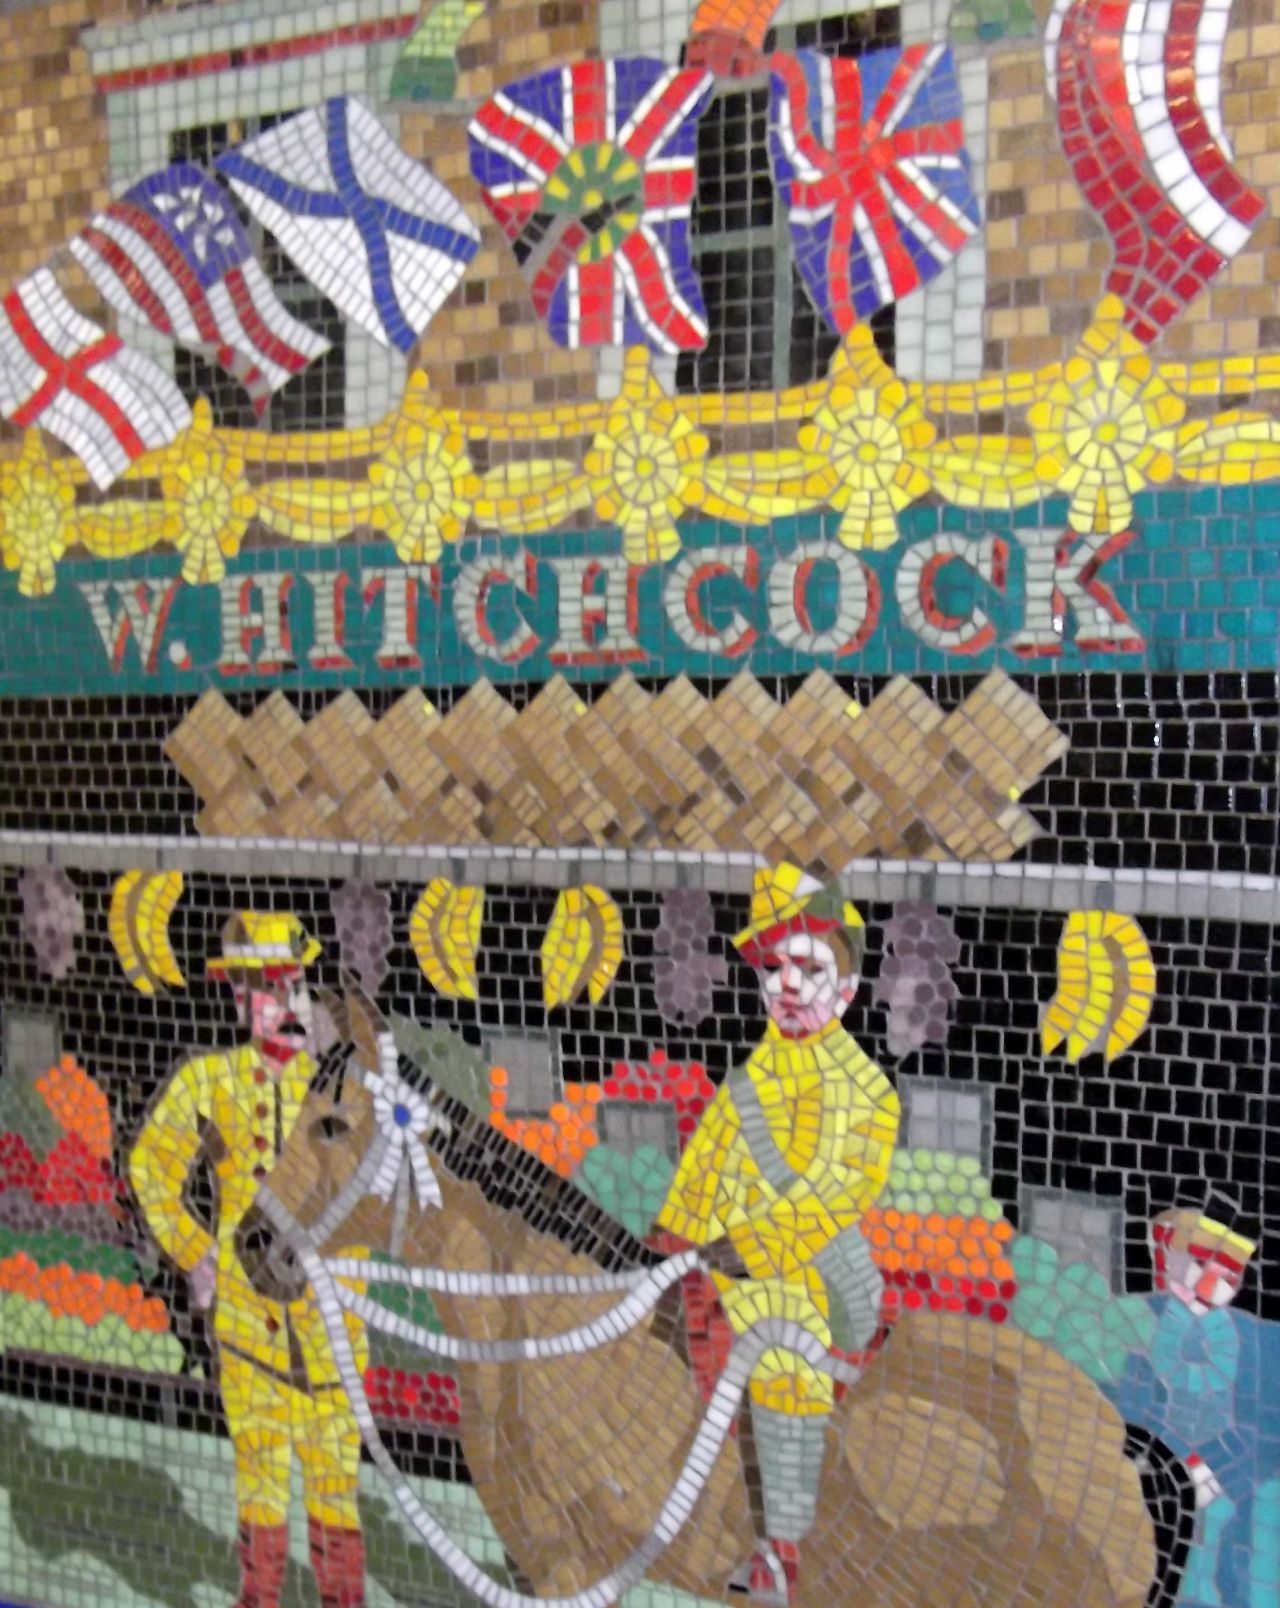 But the director's links with the area are celebrated in other ways: At Leytonston tube station, on the Central Line, the walls are decorated with mosaic murals featuring scenes from Hitchcock's life and films.